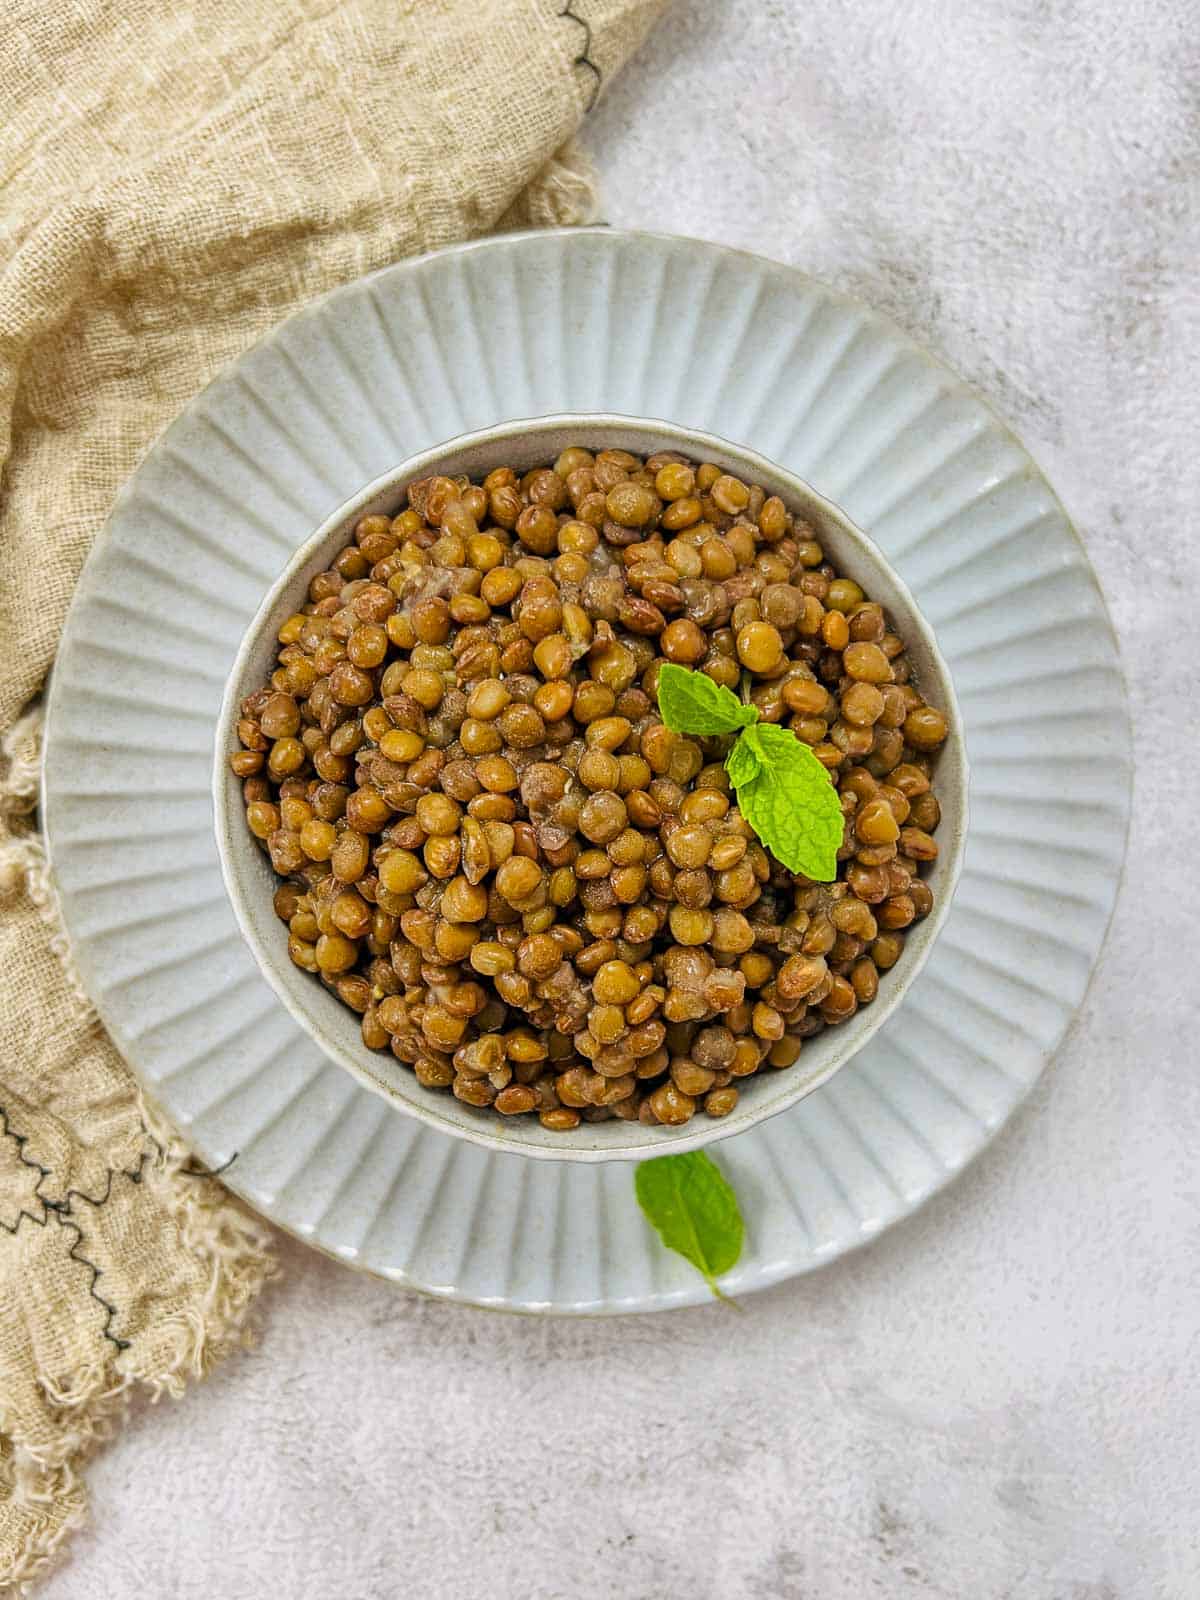 Brown lentils in a white bowl.